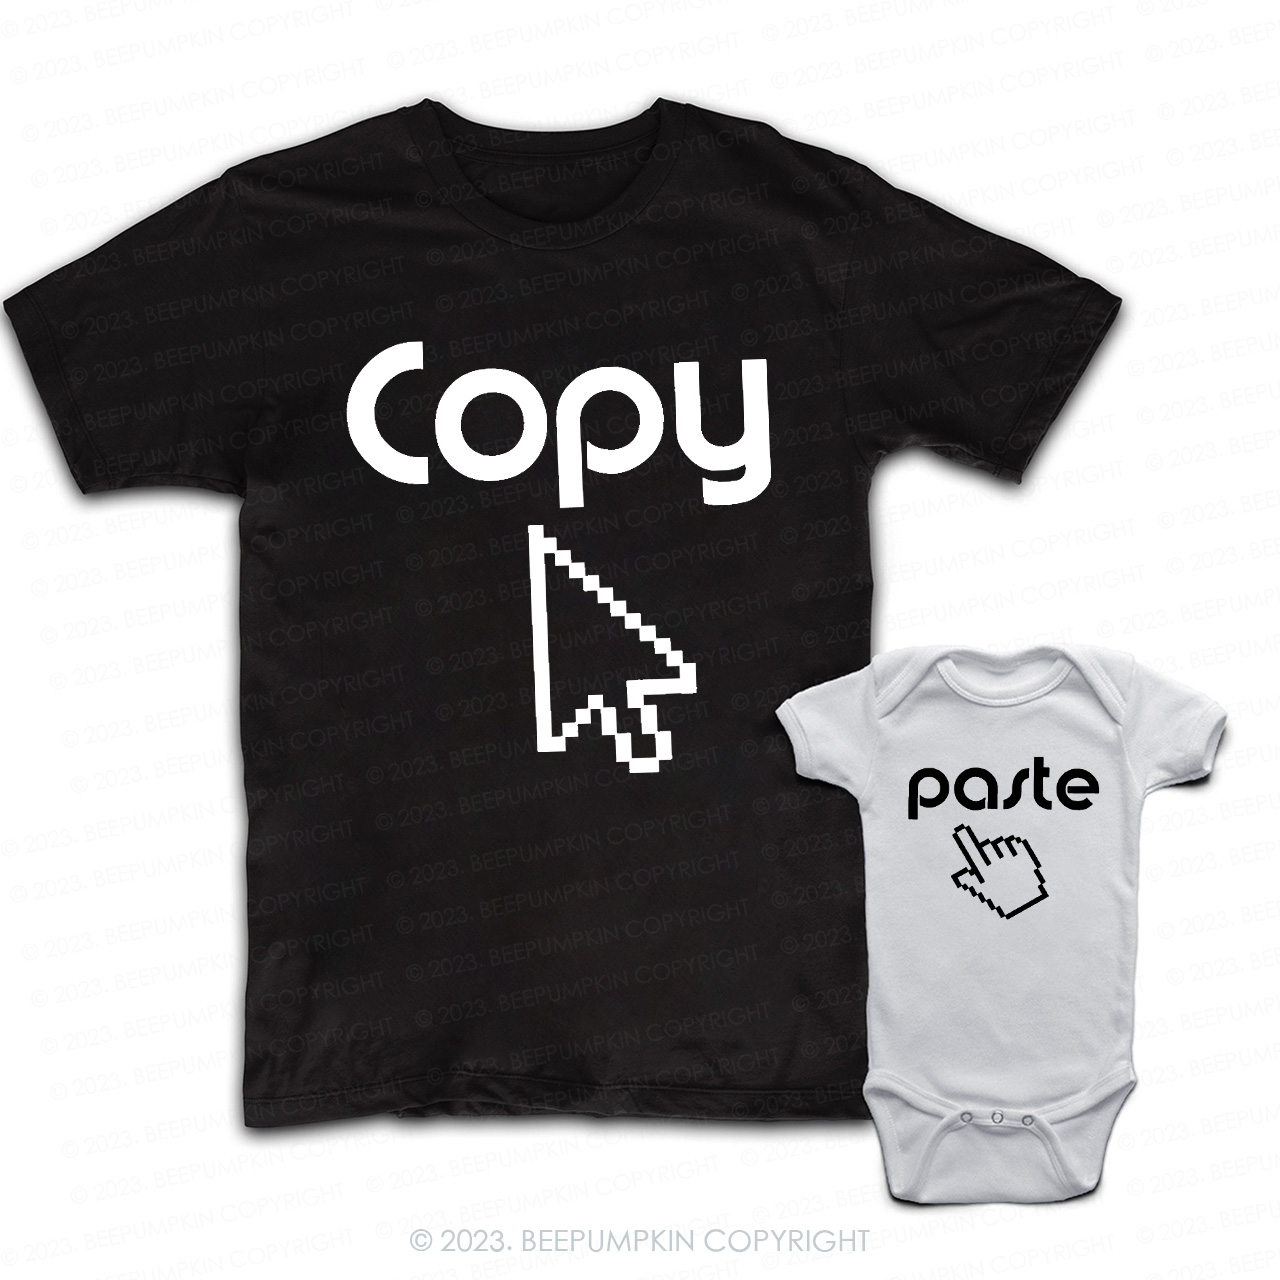 Dad & Me Matching T-Shirts – Copy And Paste